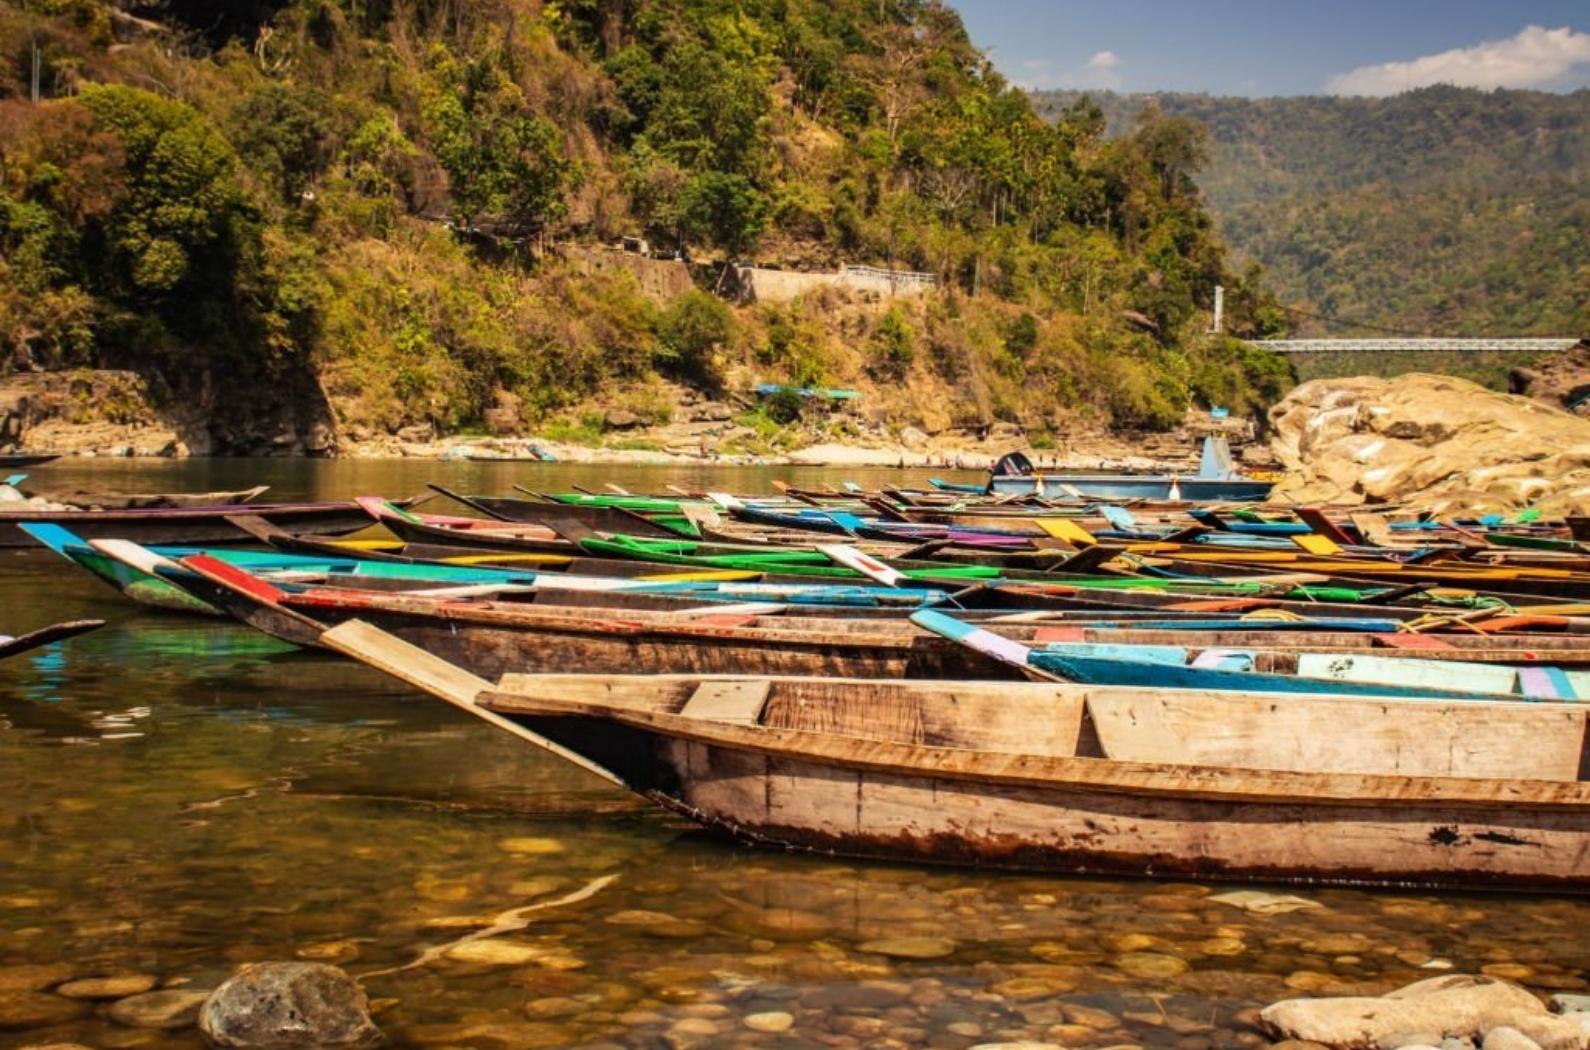 Colorful tourist traditional wood boats isolated many at river edge image is taken at dwaki lake Meghalya, India.